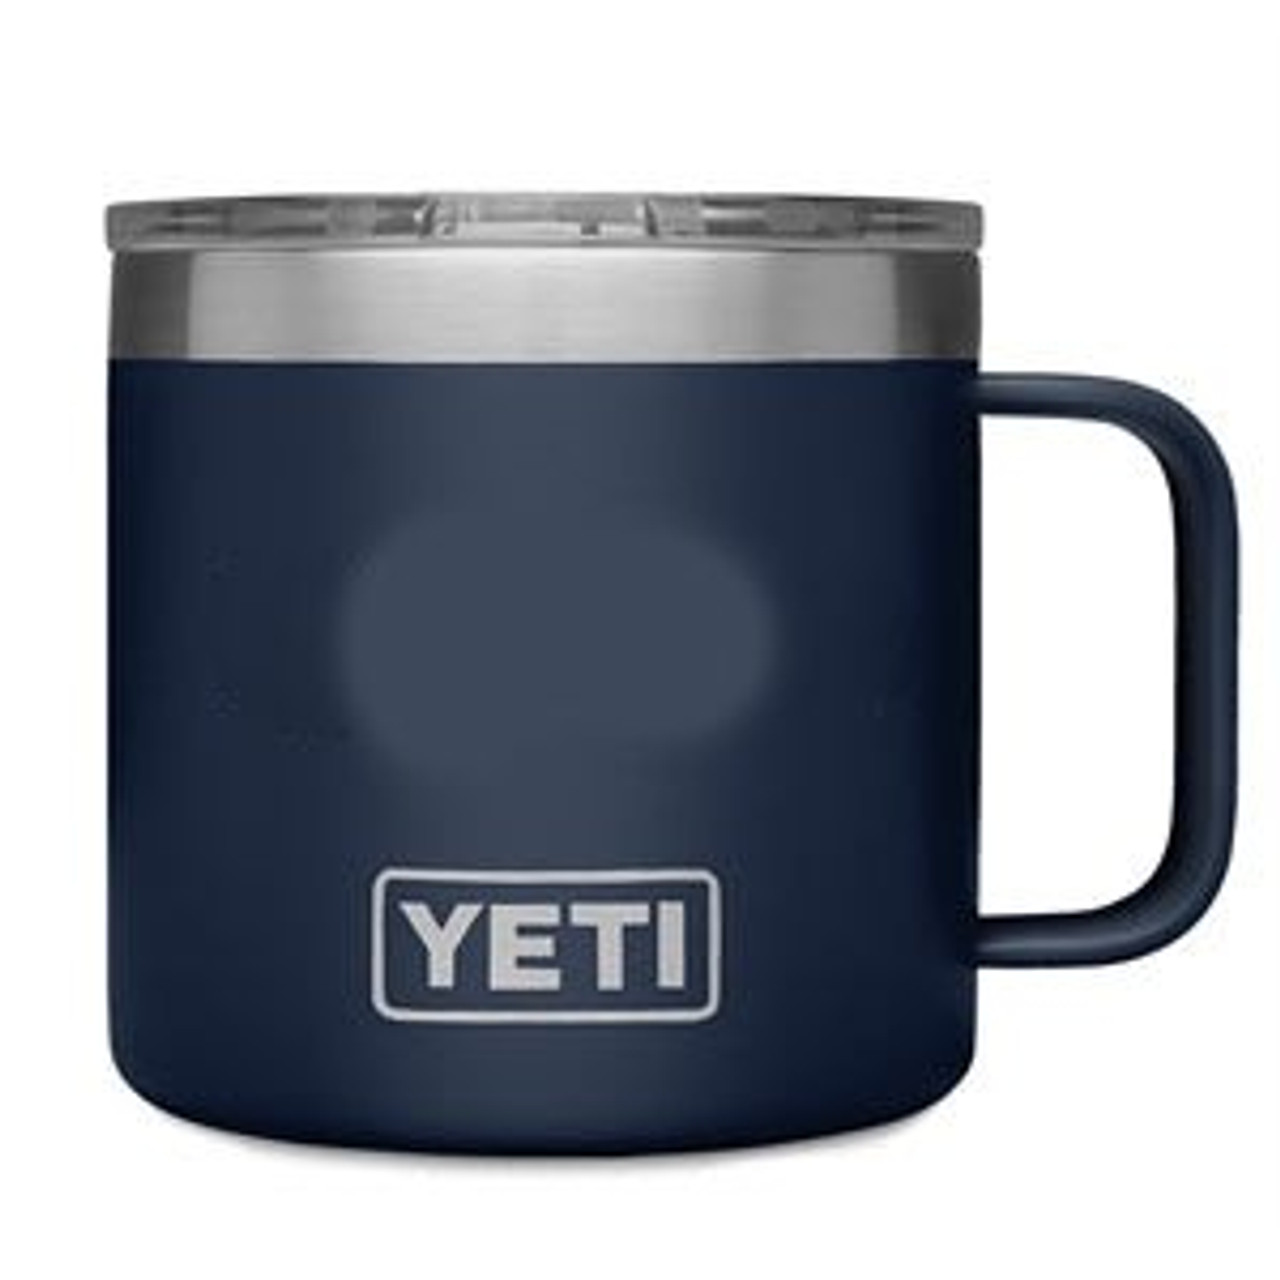 Have you seen the NEW Yeti 14oz mug? Same great quality you expect from Yeti  with the convenience and capacity to enjoy coffee and…